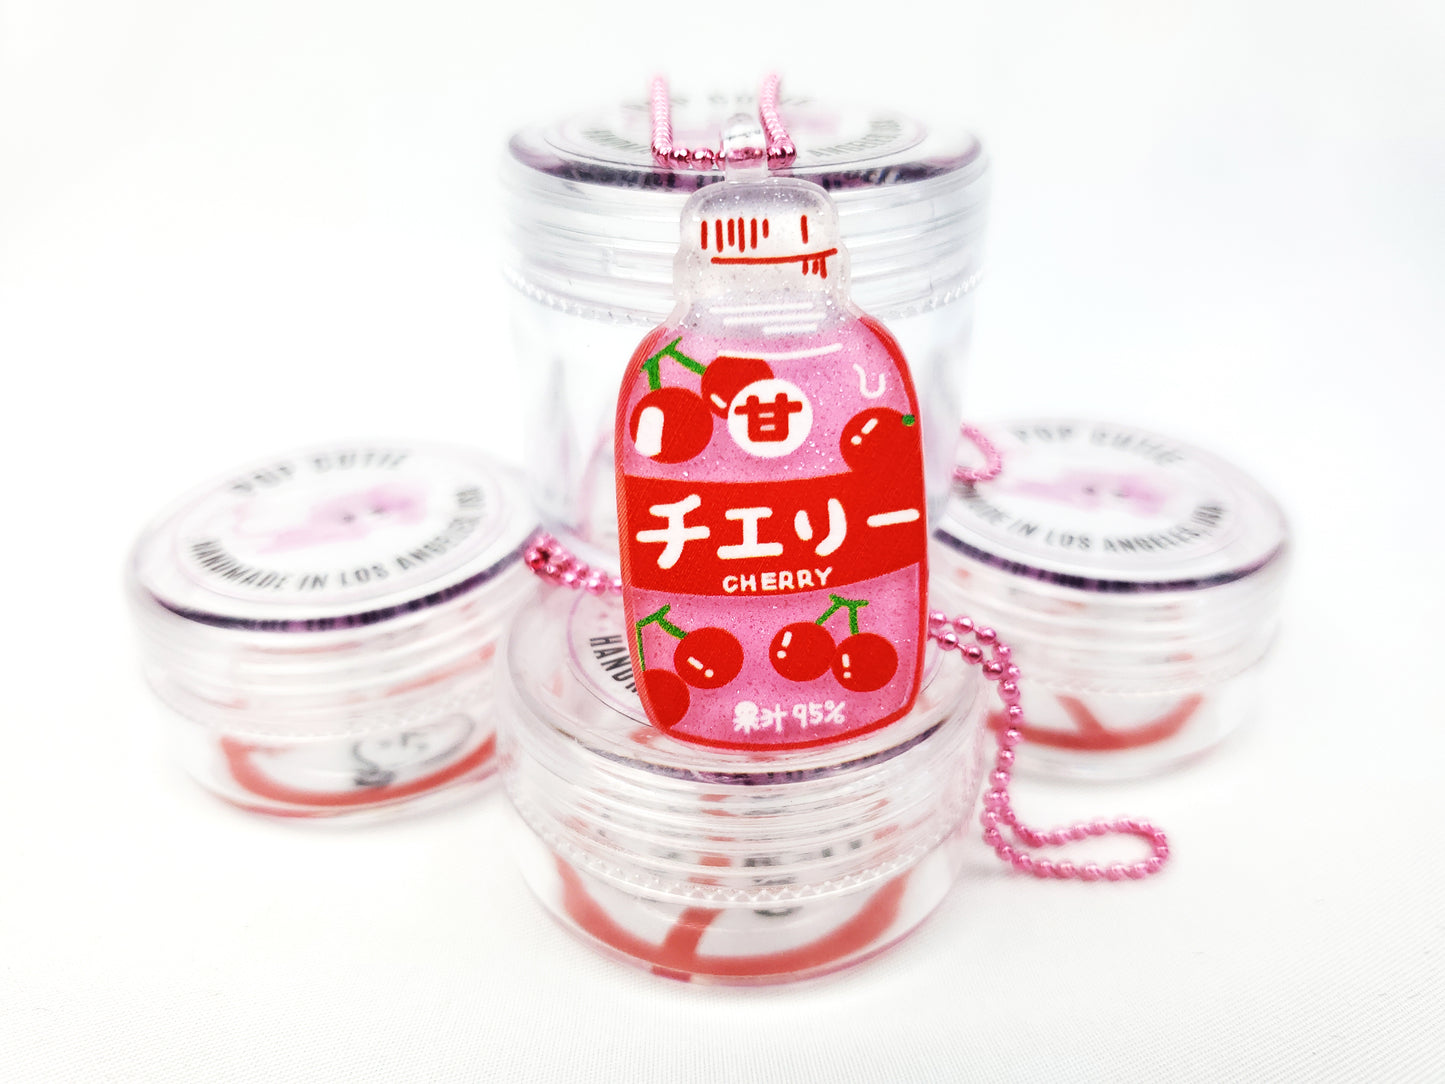 Japanese Drink Necklace (Limited Edition)